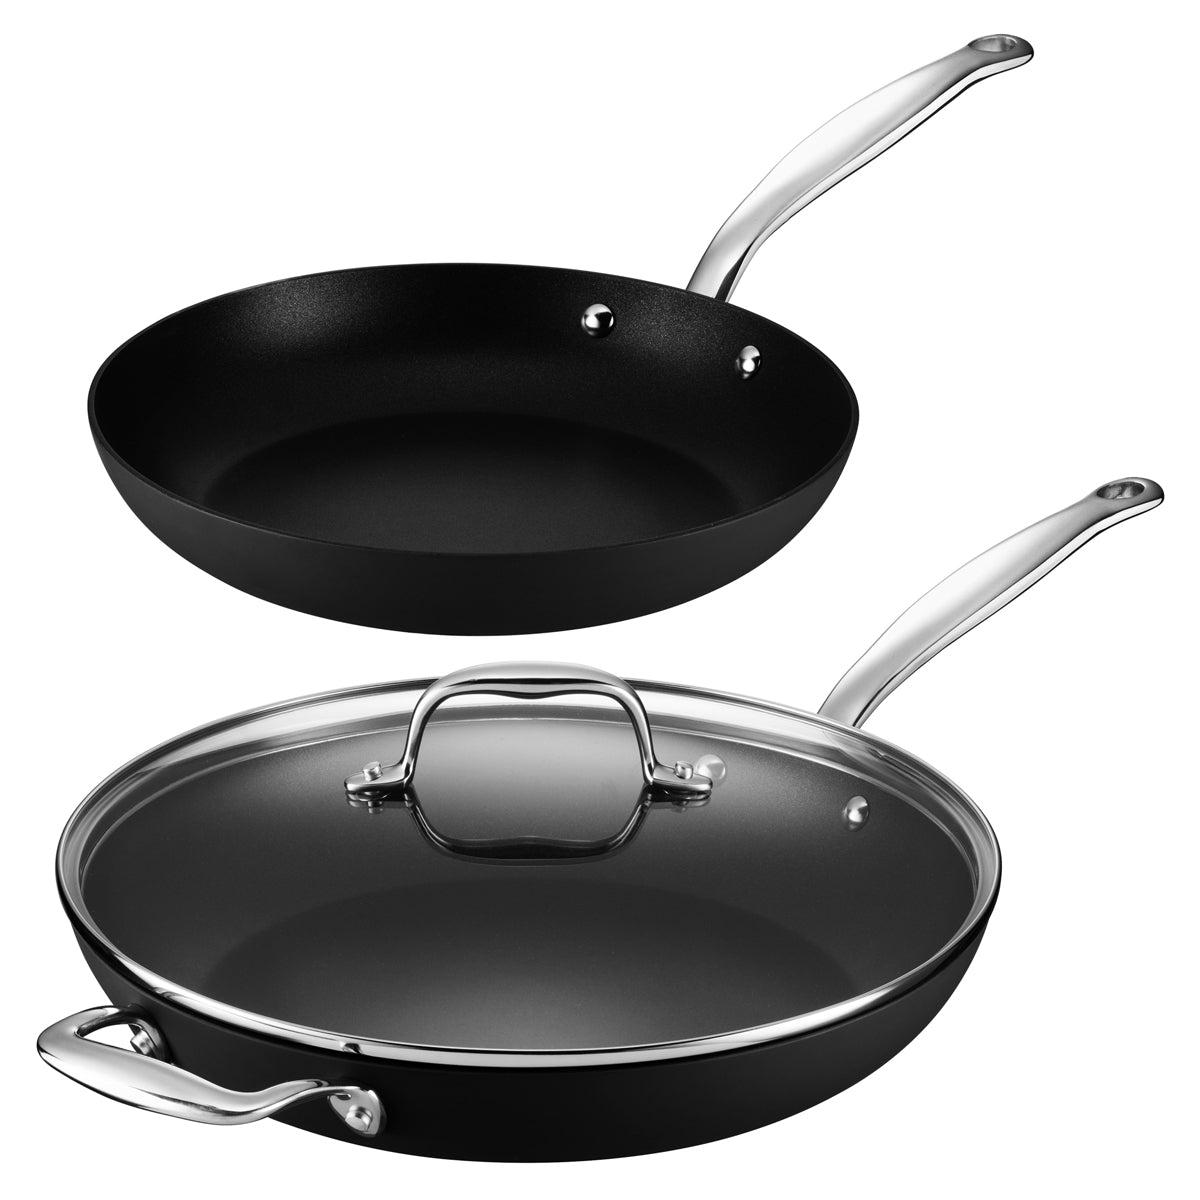 Calphalon Classic Hard-Anodized Nonstick Cookware 14-Piece Pots and Pans Set with No-Boil-Over Inserts - Black, Stainless Steel